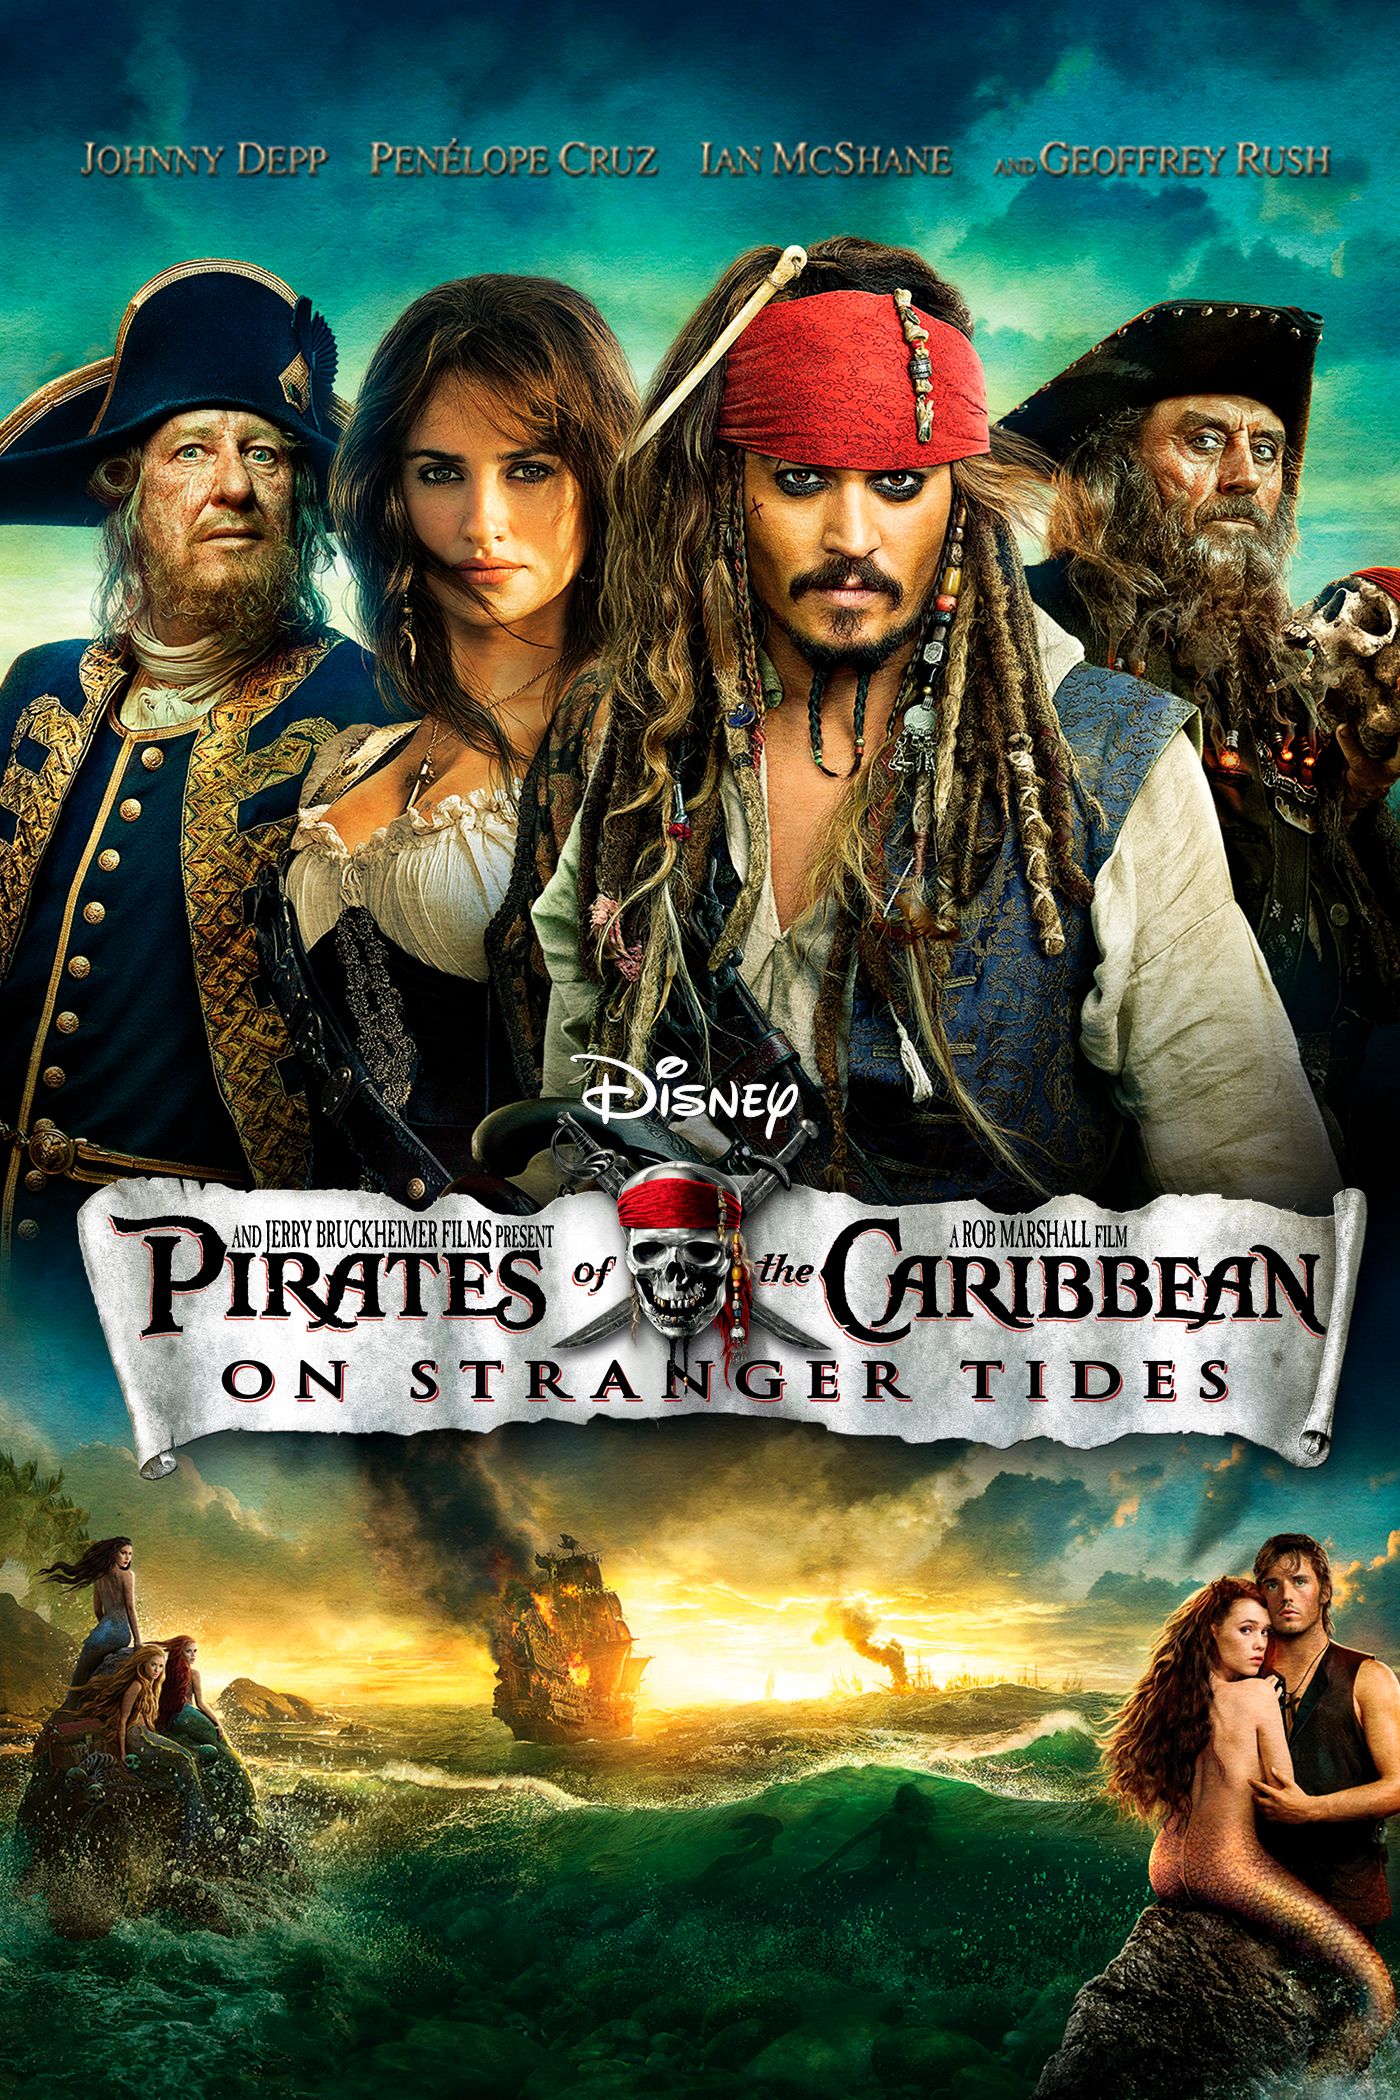 Best of Pirates of the caribbean online movie